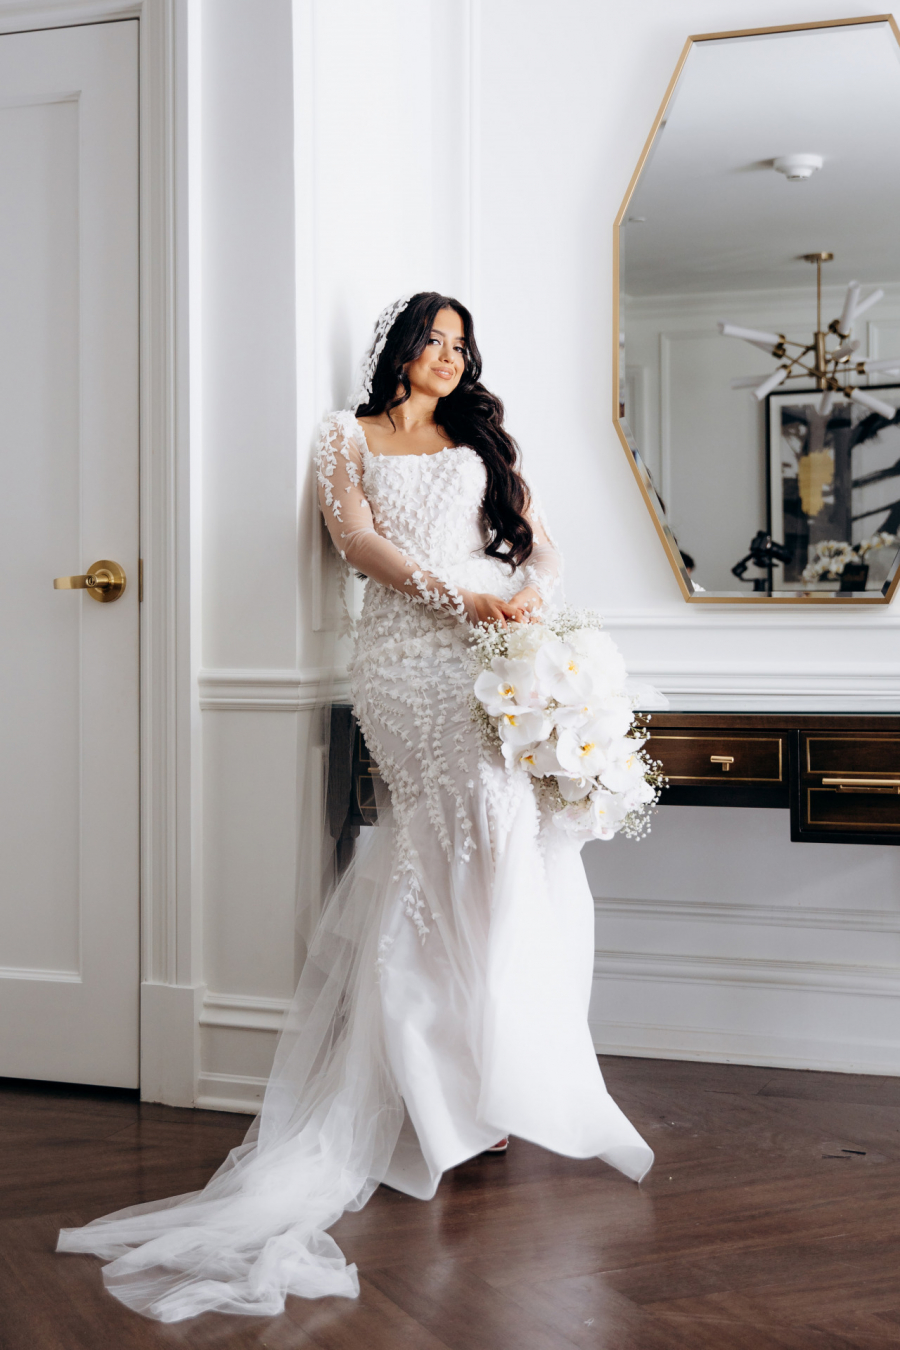 Egyprian coptic wedding editorial style in New Jersey 32